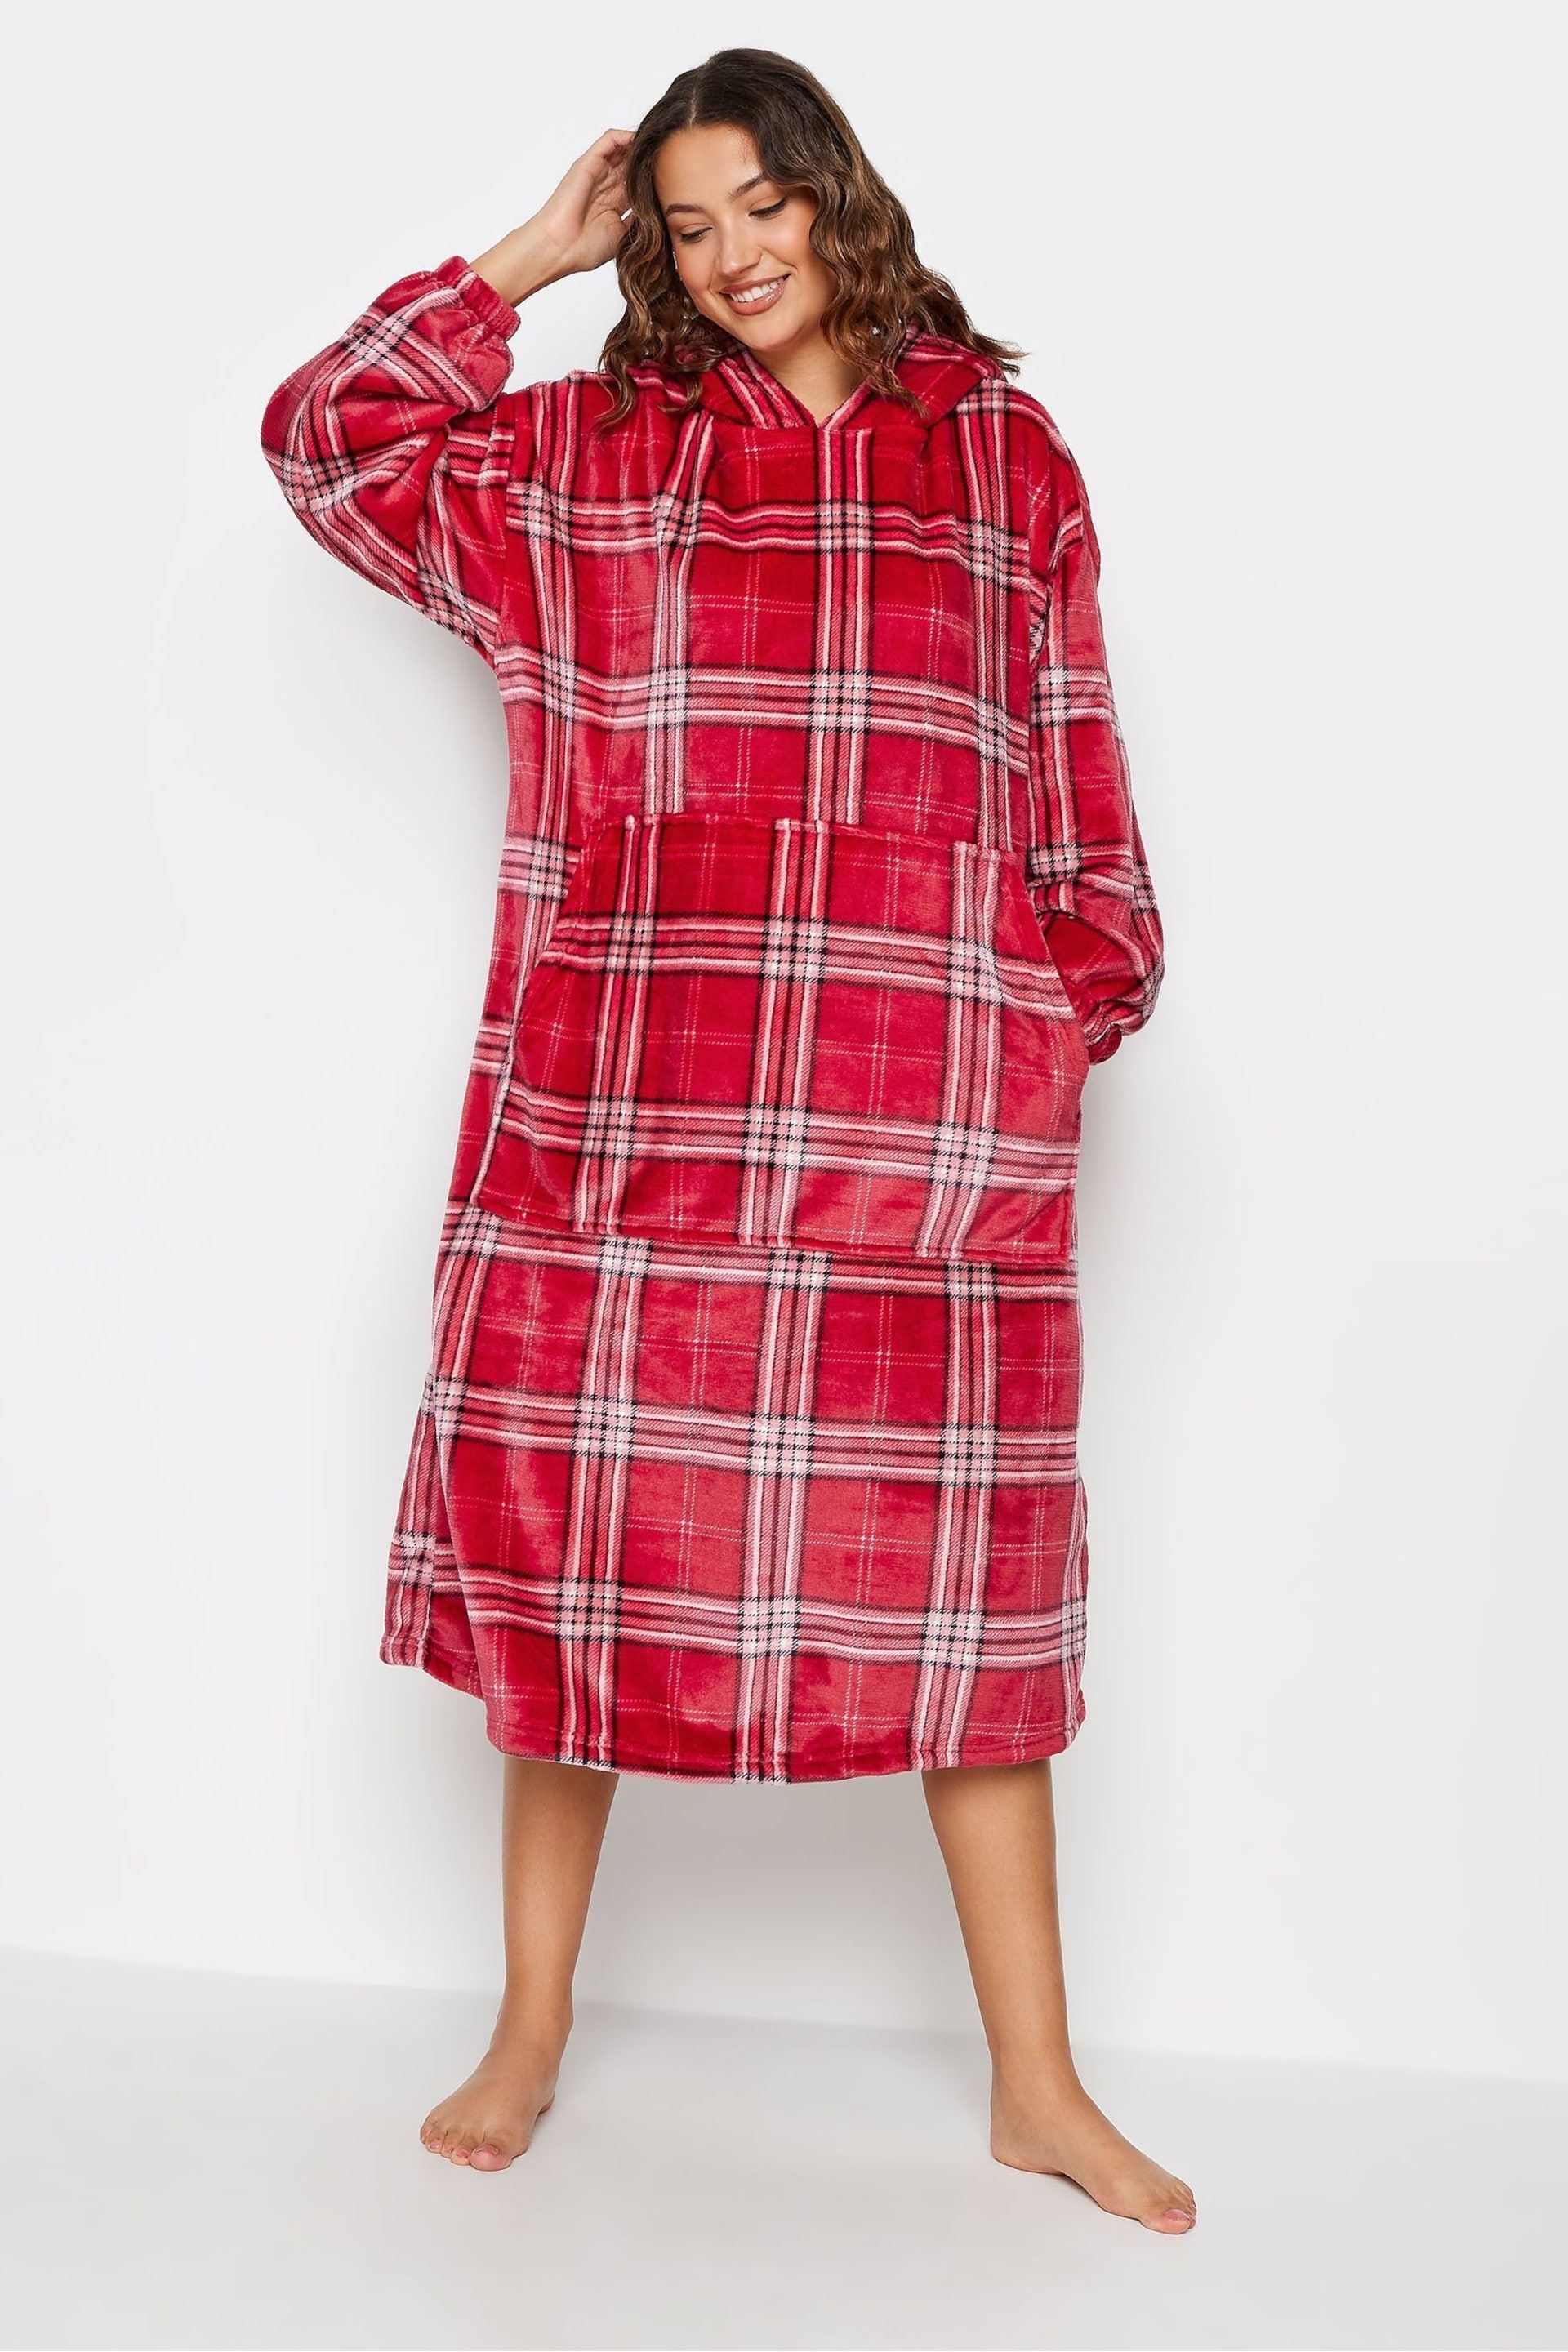 Long Tall Sally Red Snuggle Hoodie - Image 1 of 6